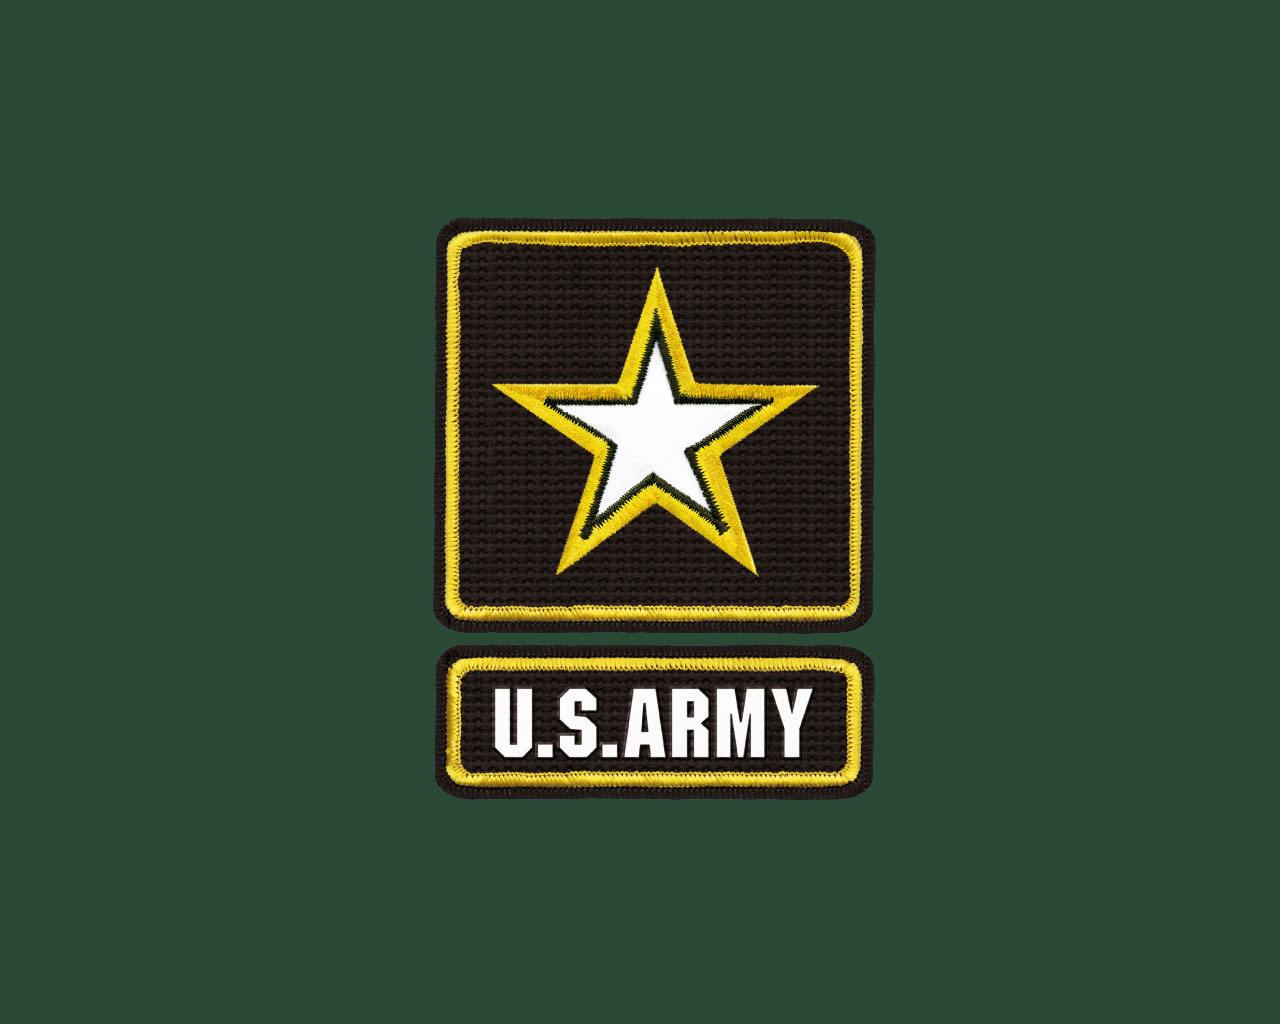 US Army Wallpaper Backgrounds